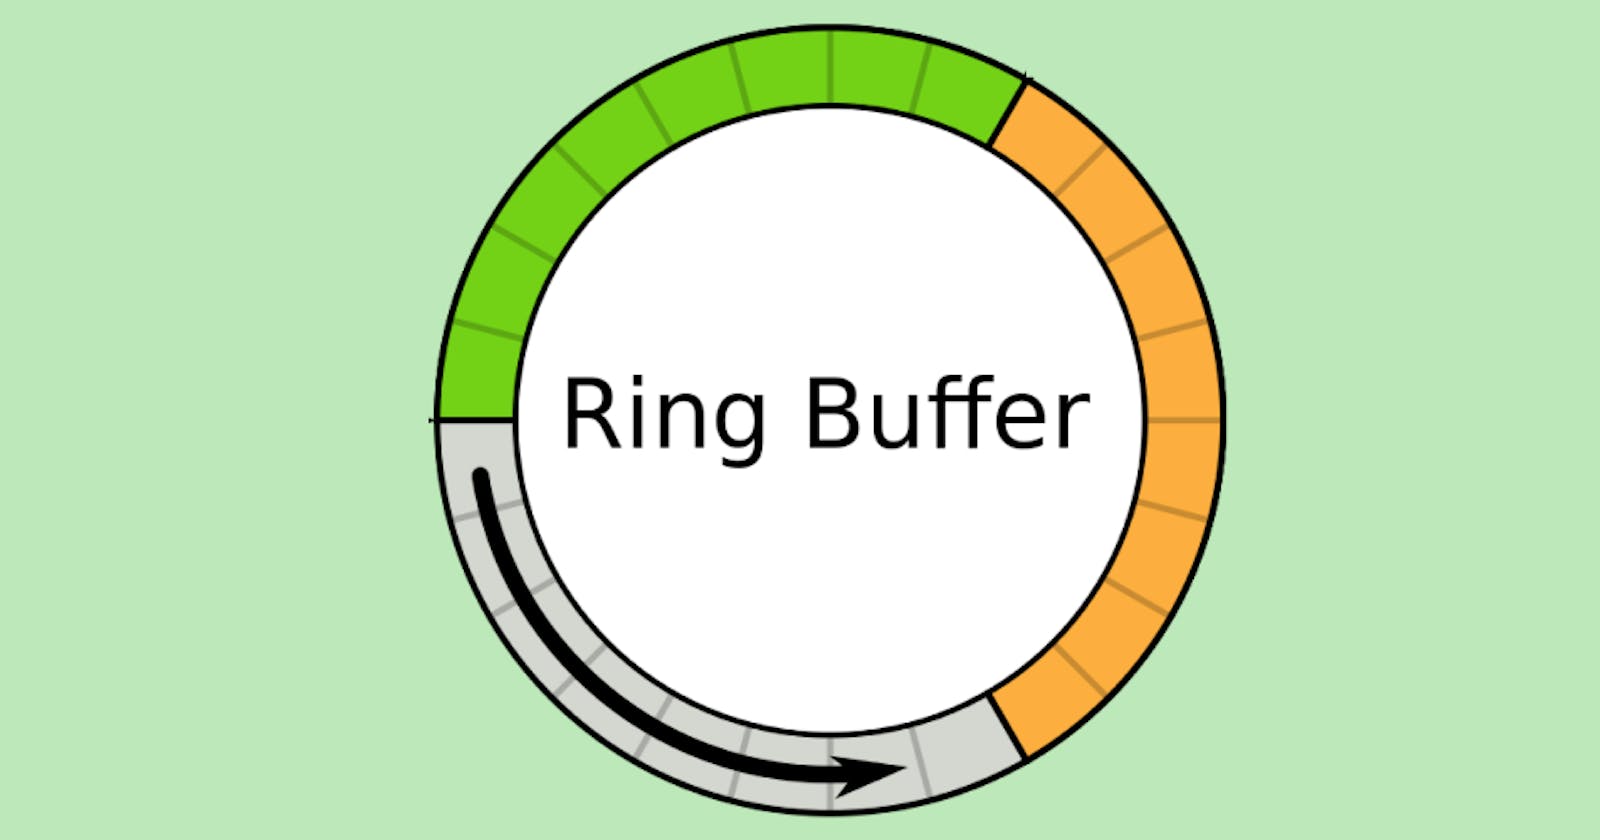 A quick introduction to the ring buffer data structure.